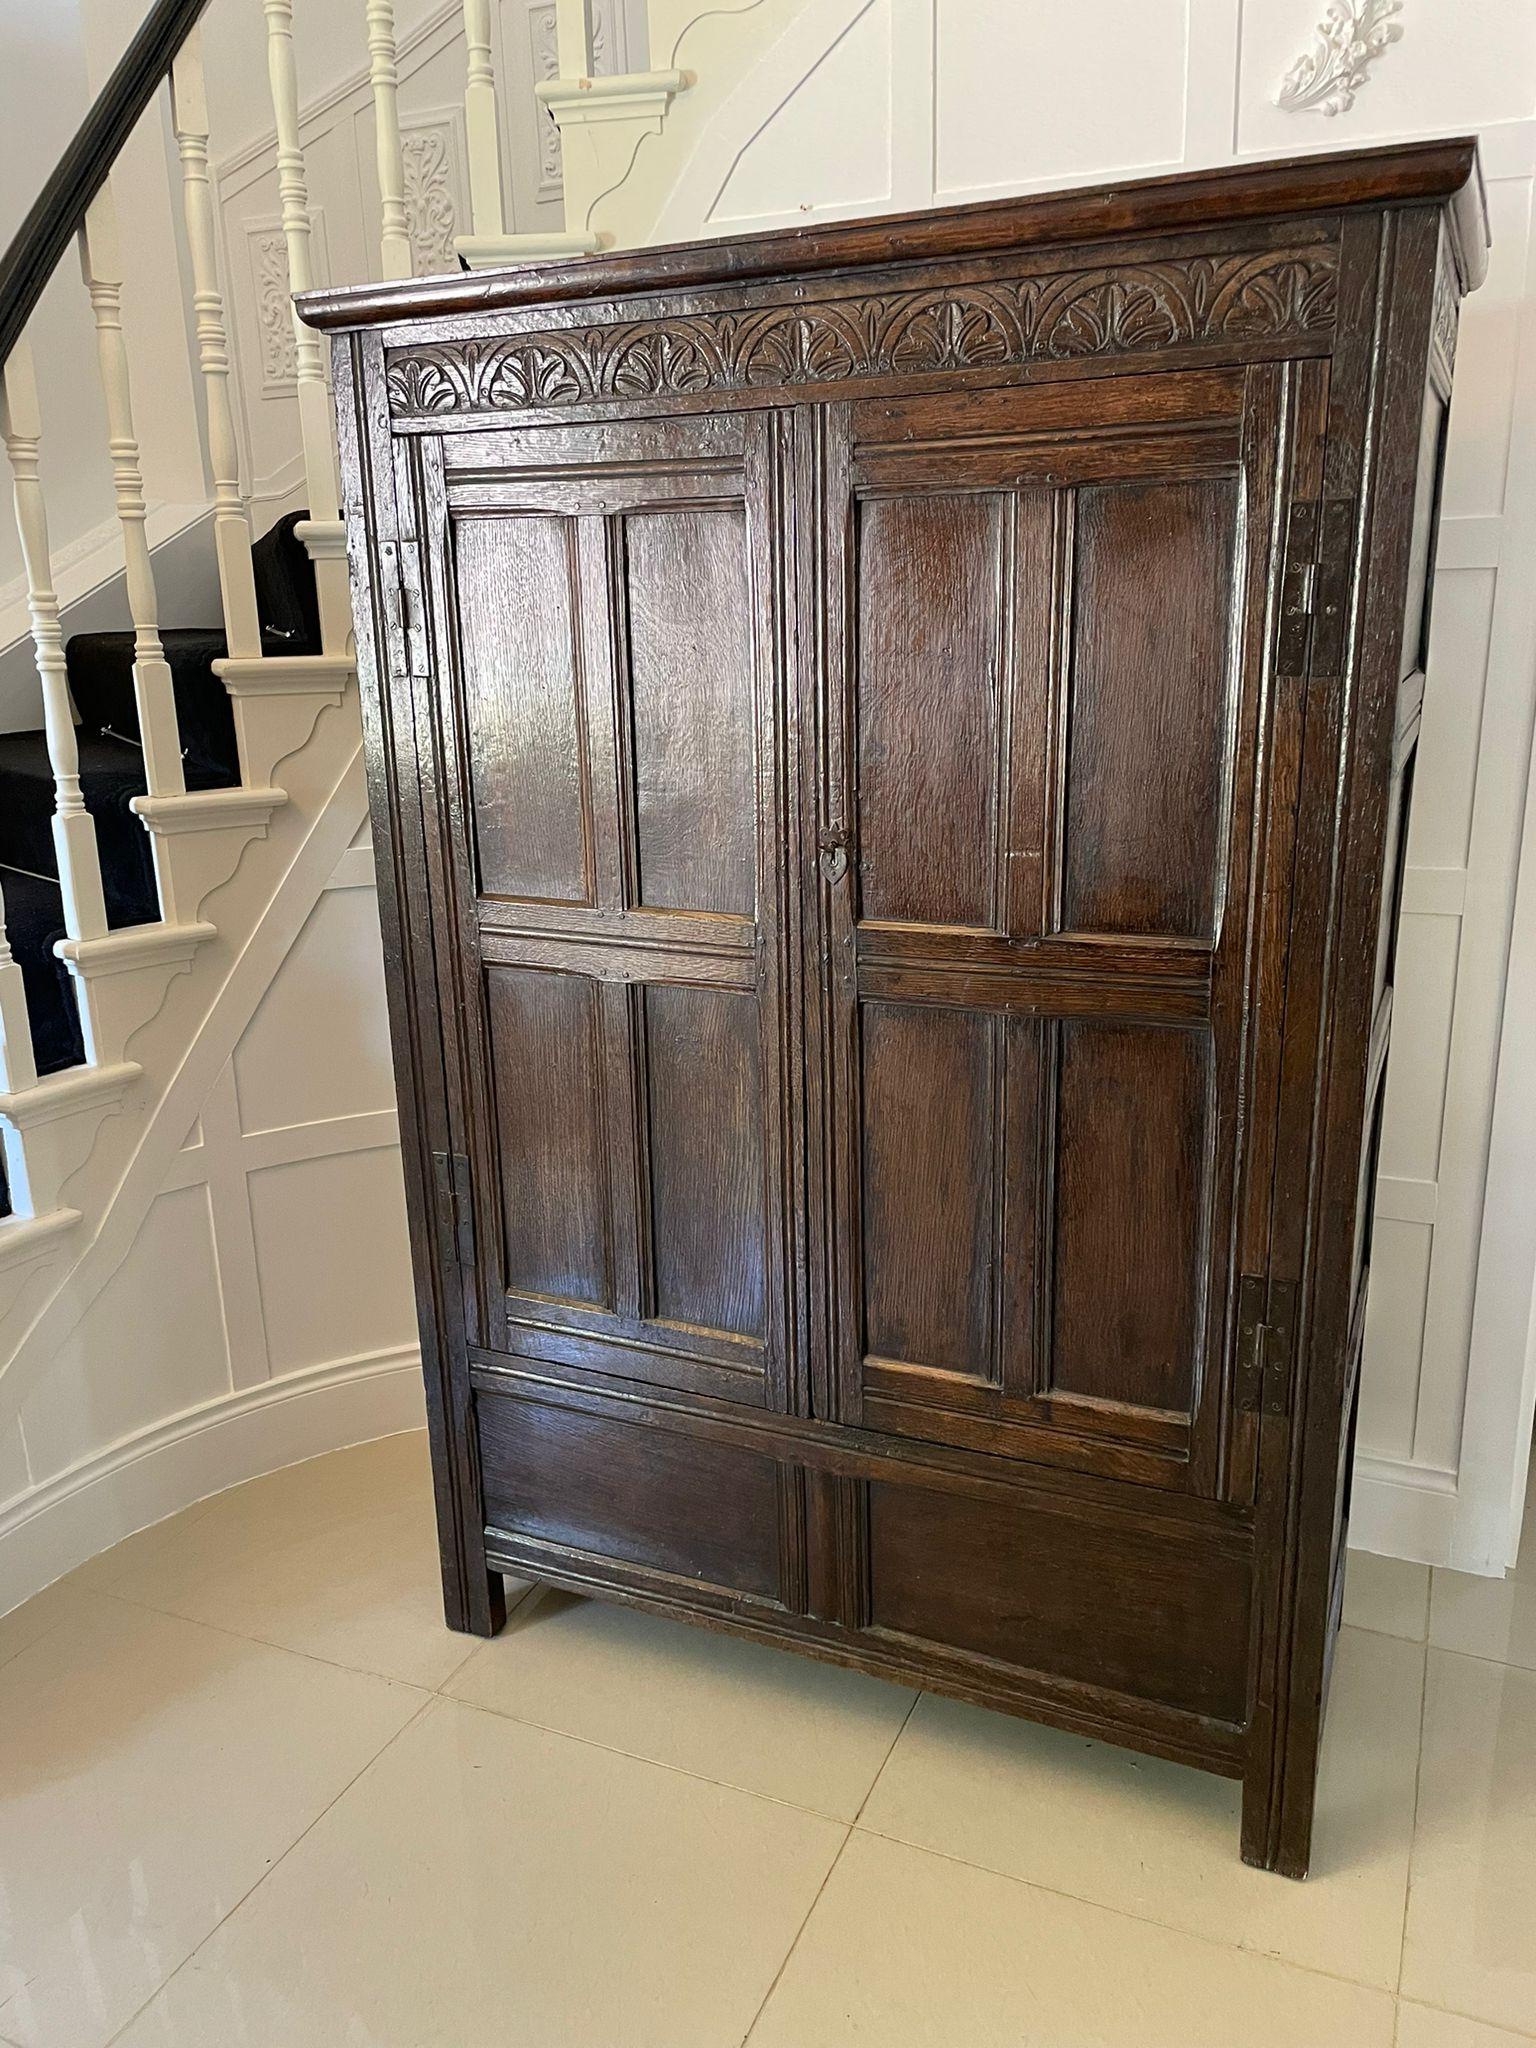 An original 17th century oak hall cupboard with a moulded cornice and a quality carved frieze above a pair of oak moulded panelled doors with original wrought iron hinges opening to reveal a hanging or storage compartment, moulded panelled sides